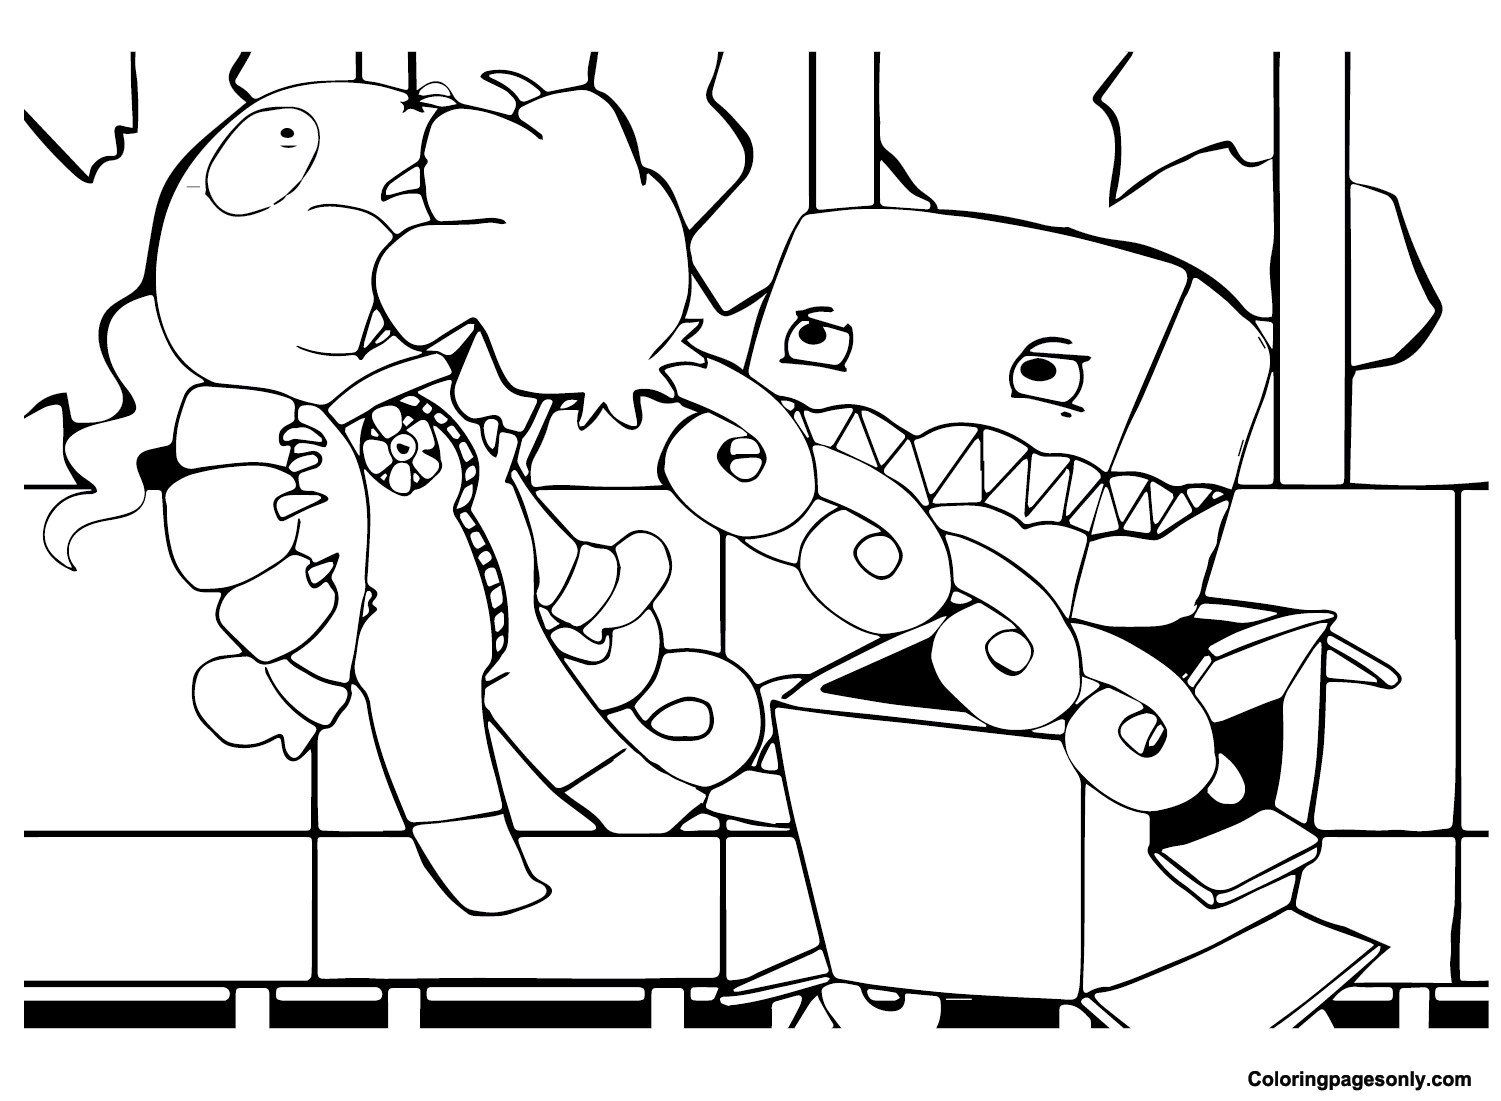 Boxy Boo Coloring Pages Printable for ...